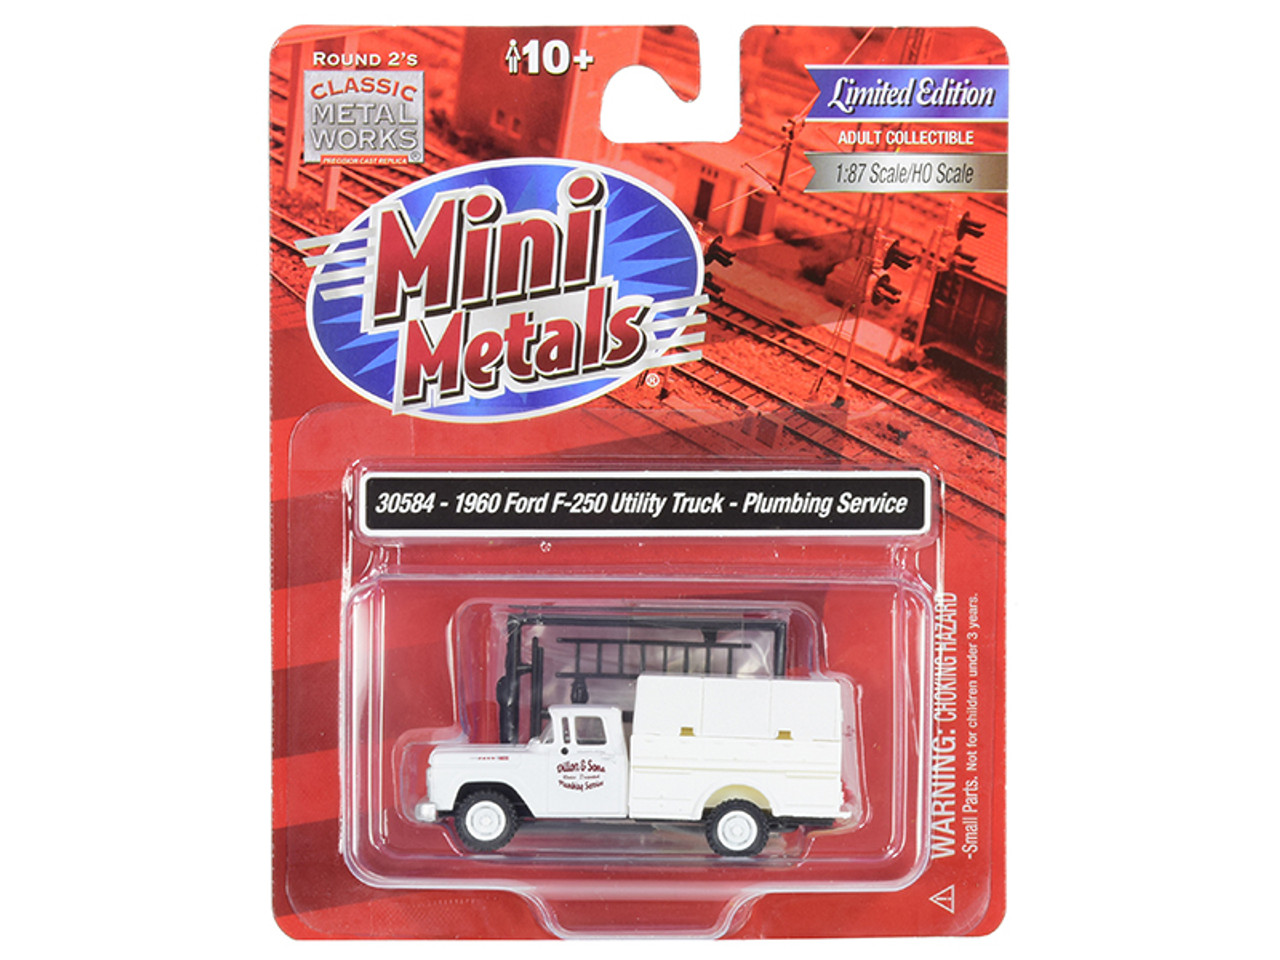 1960 Ford F-250 Utility Truck "Plumbing Service" White 1/87 (HO) Scale Model by Classic Metal Works